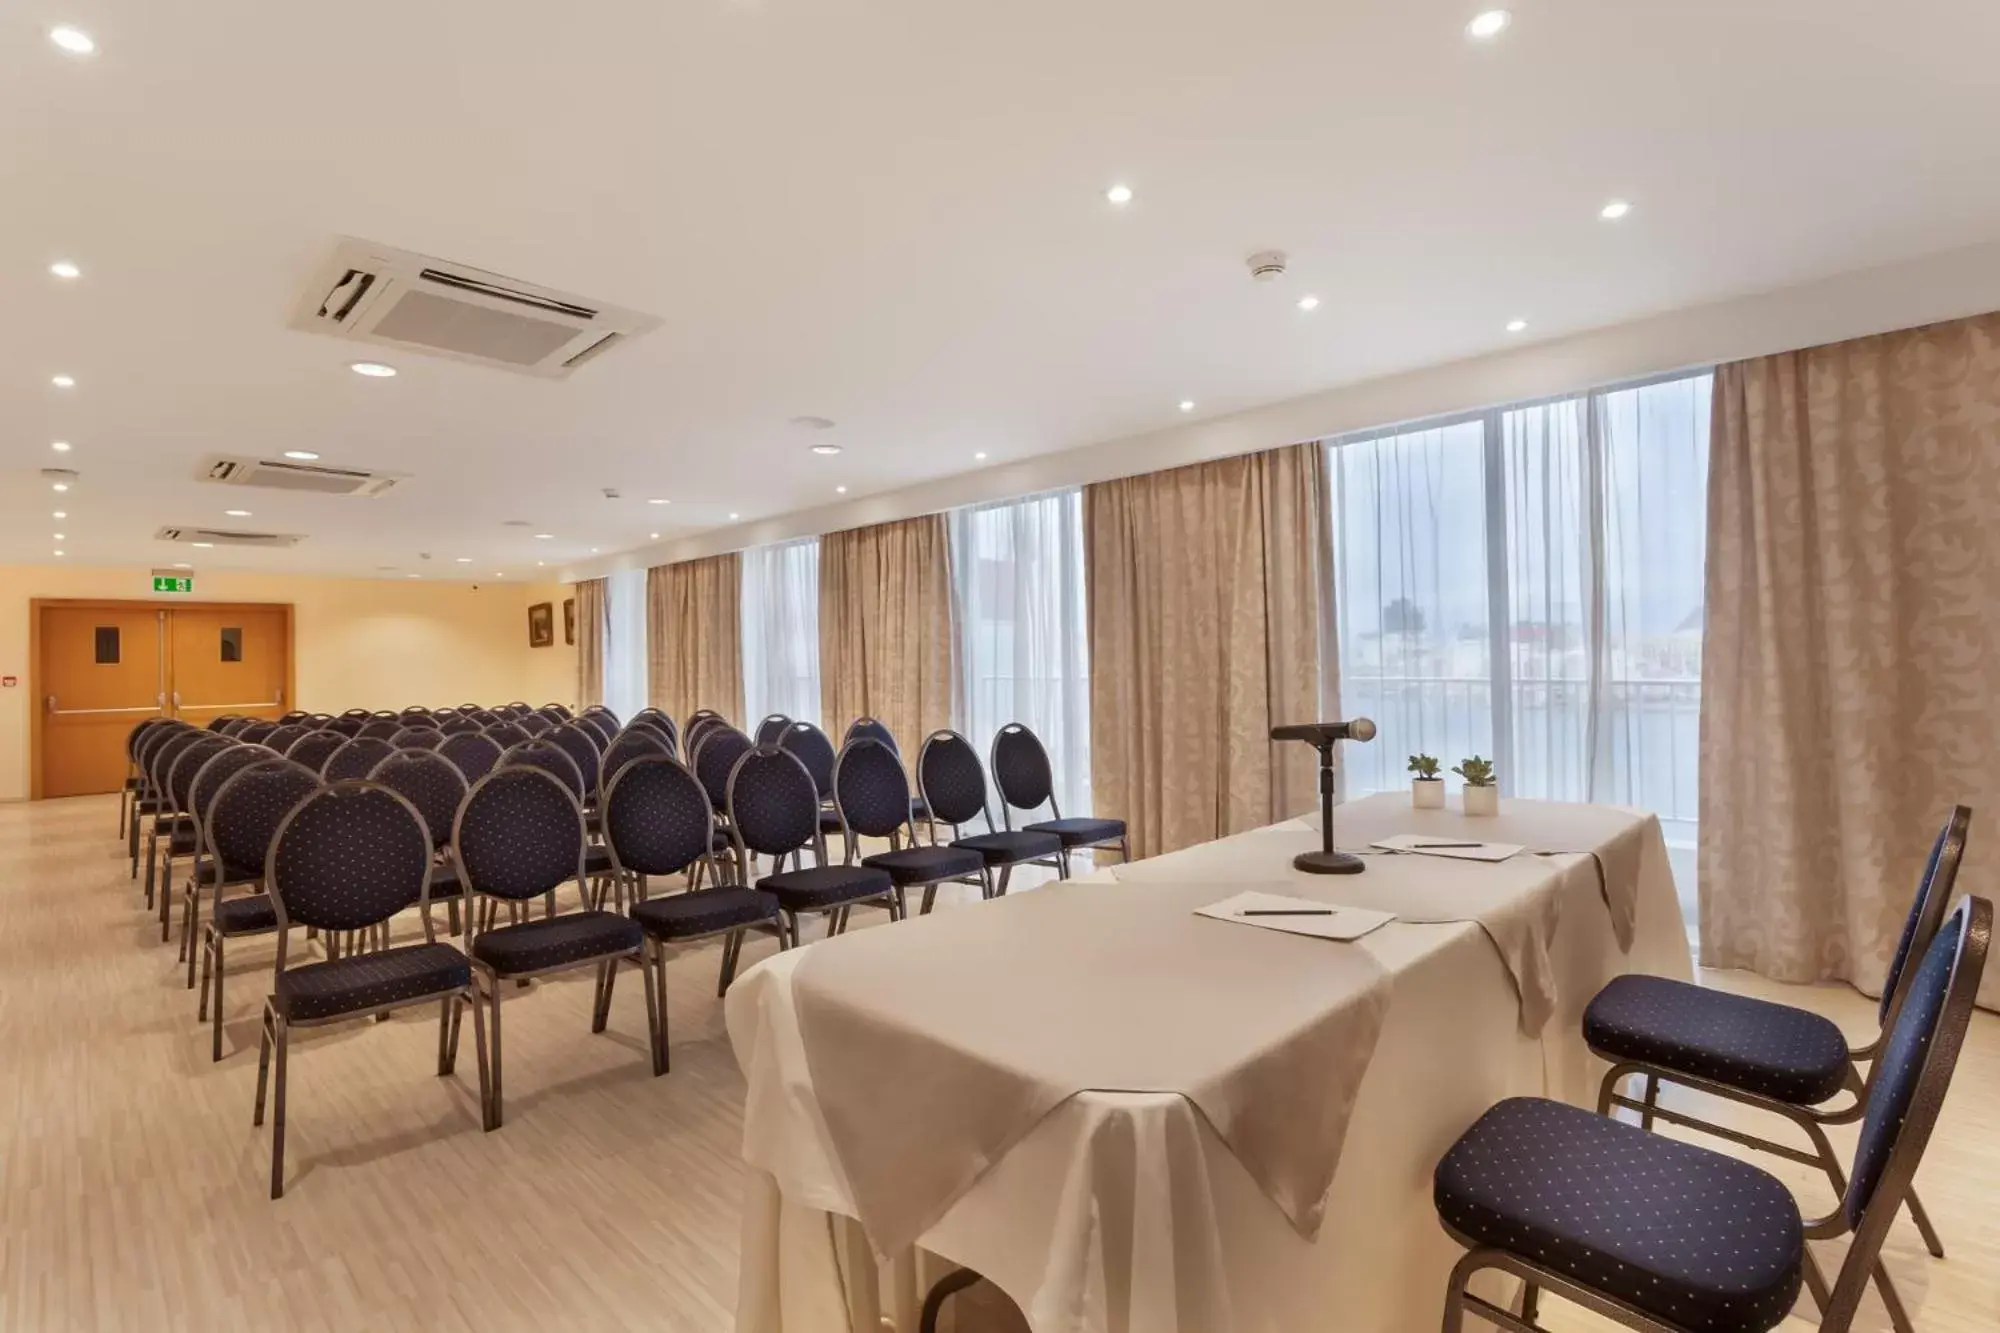 Meeting/conference room in Plaza Regency Hotels